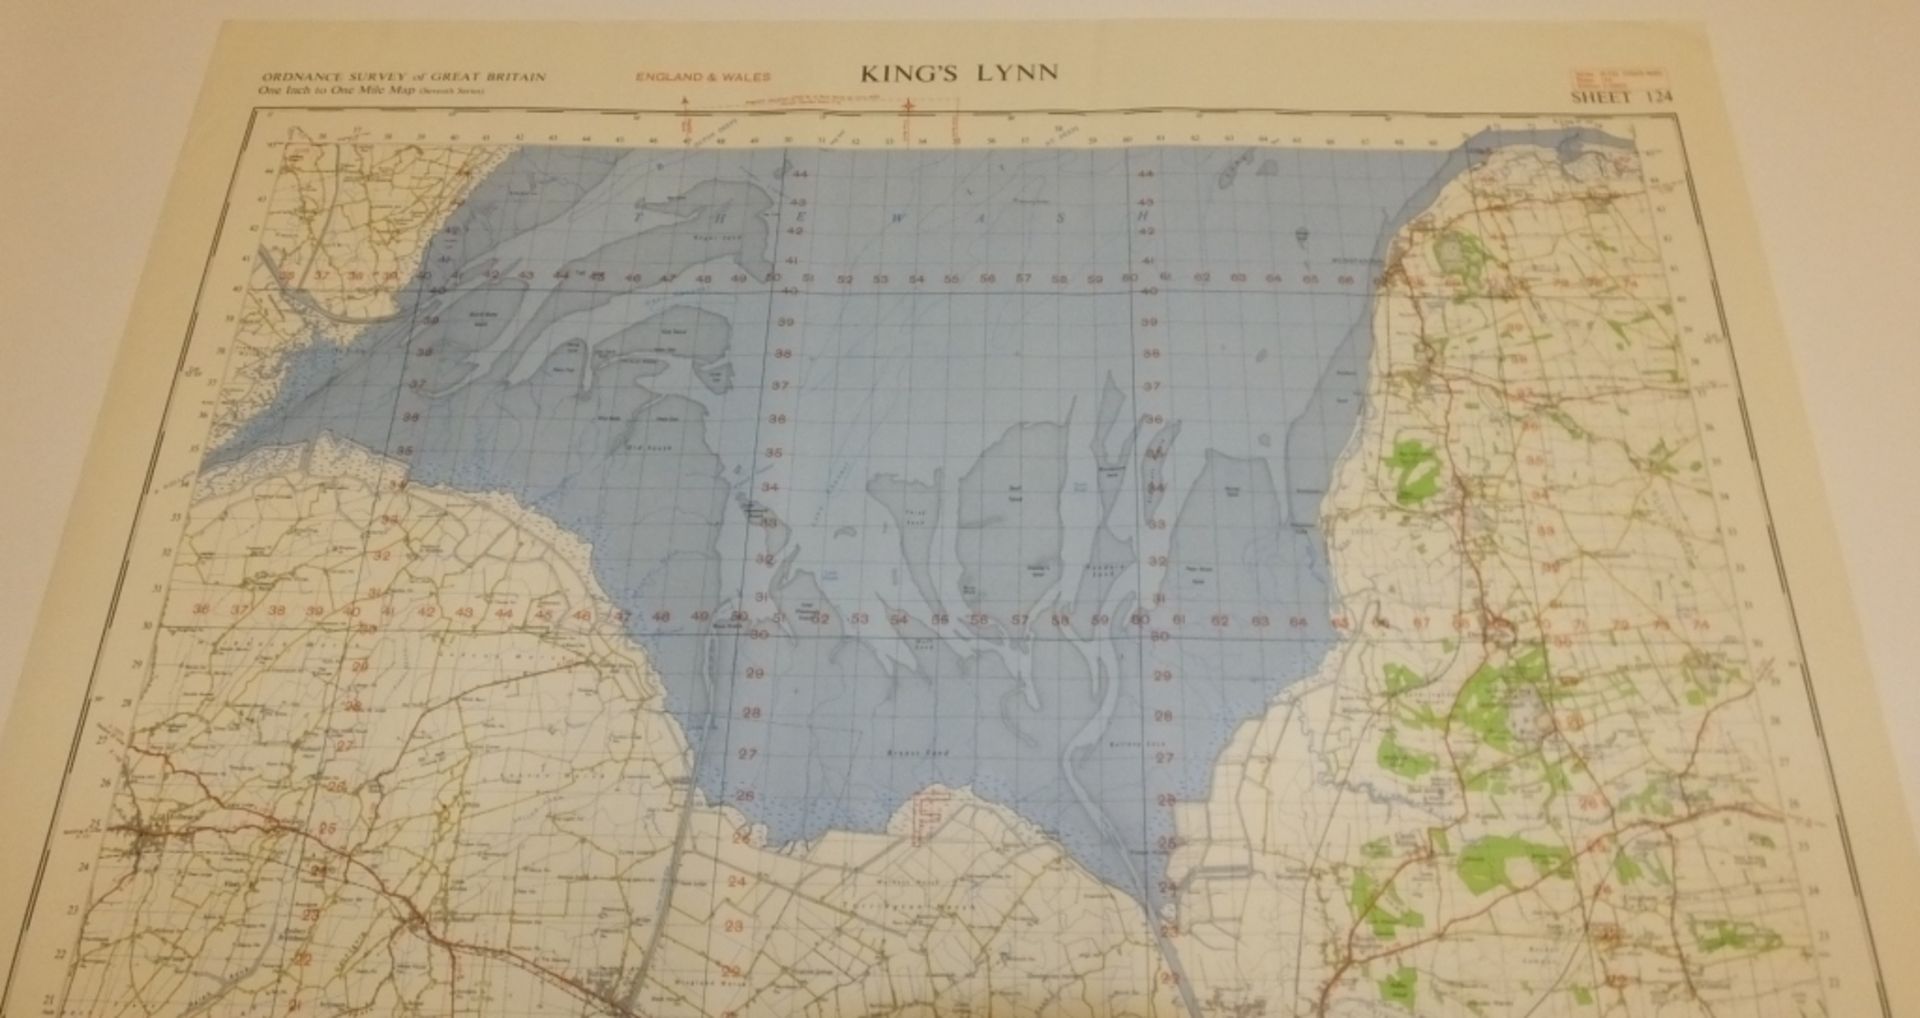 27x ENGLAND & WALES MAP KINGS LYNN 1INCH 1MILE 1958 7TH SERIES 3GSGS SHEET 124 - Image 3 of 5